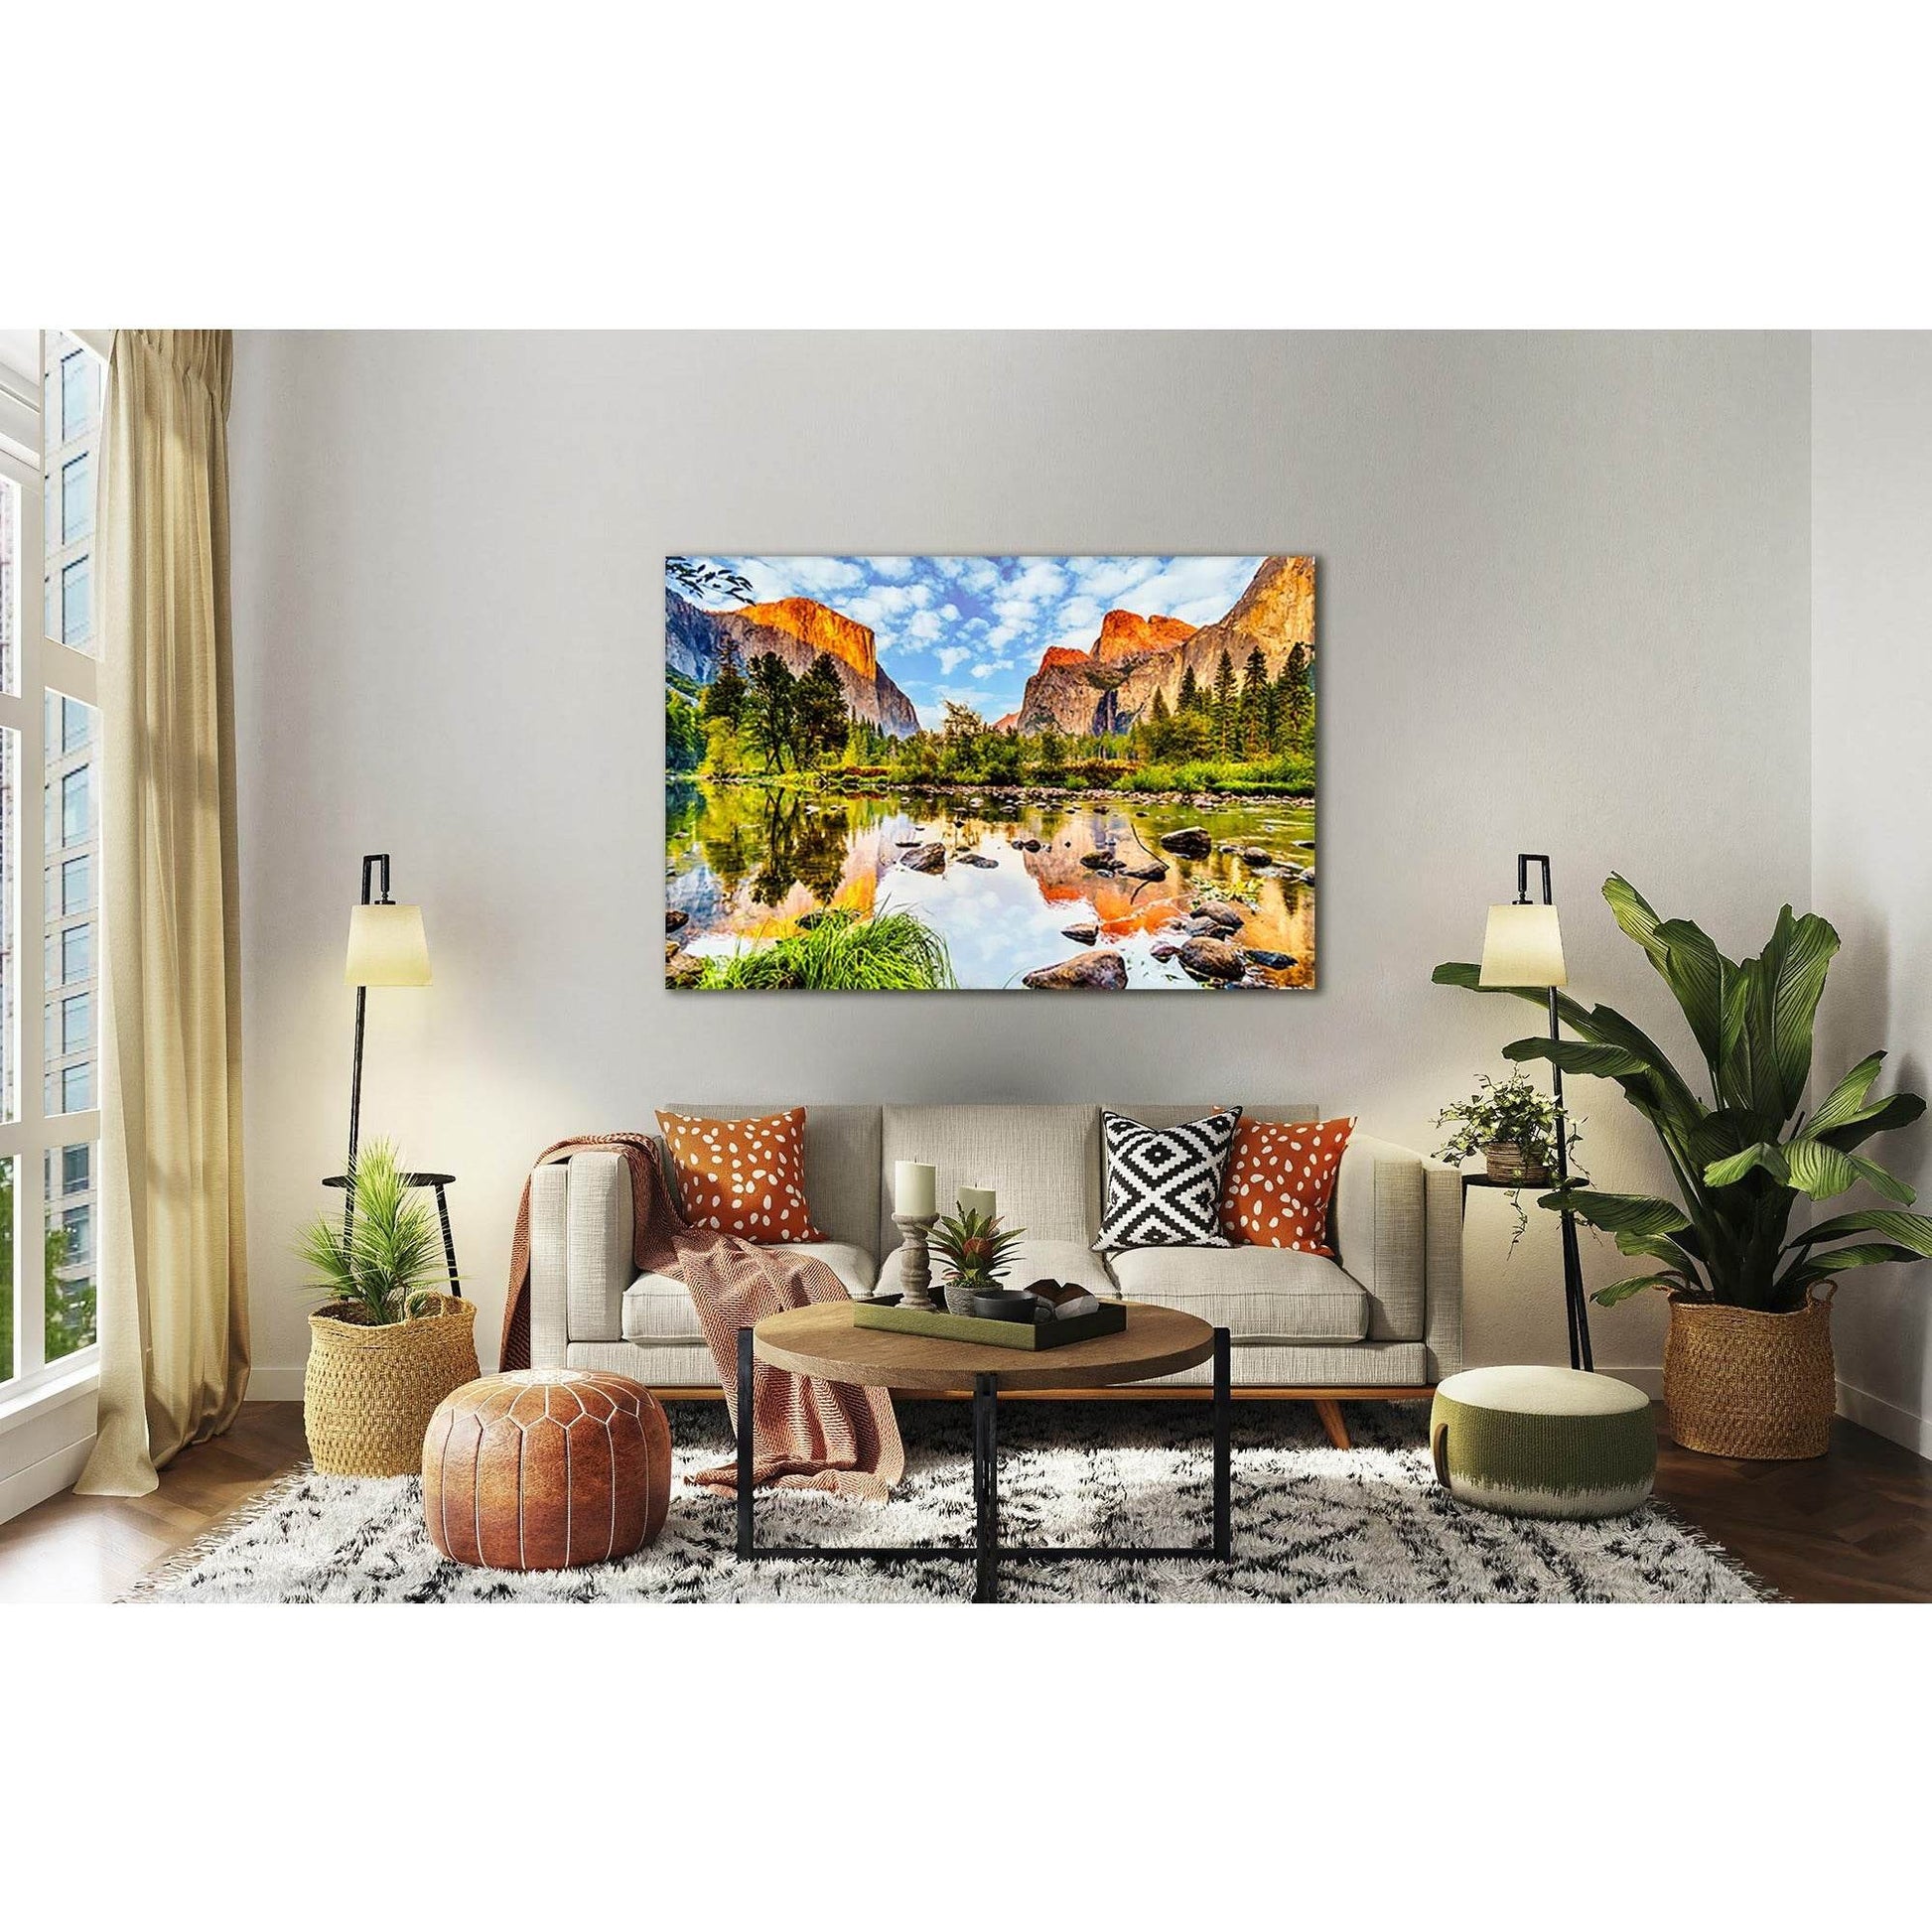 Scenic Yosemite Park Canvas Art for Cozy InteriorsThis canvas print captures the majestic El Capitan reflected in the calm waters below, with colors that pop and bring life to any room. Perfect for adding a touch of nature to a bedroom or dining room.Zell